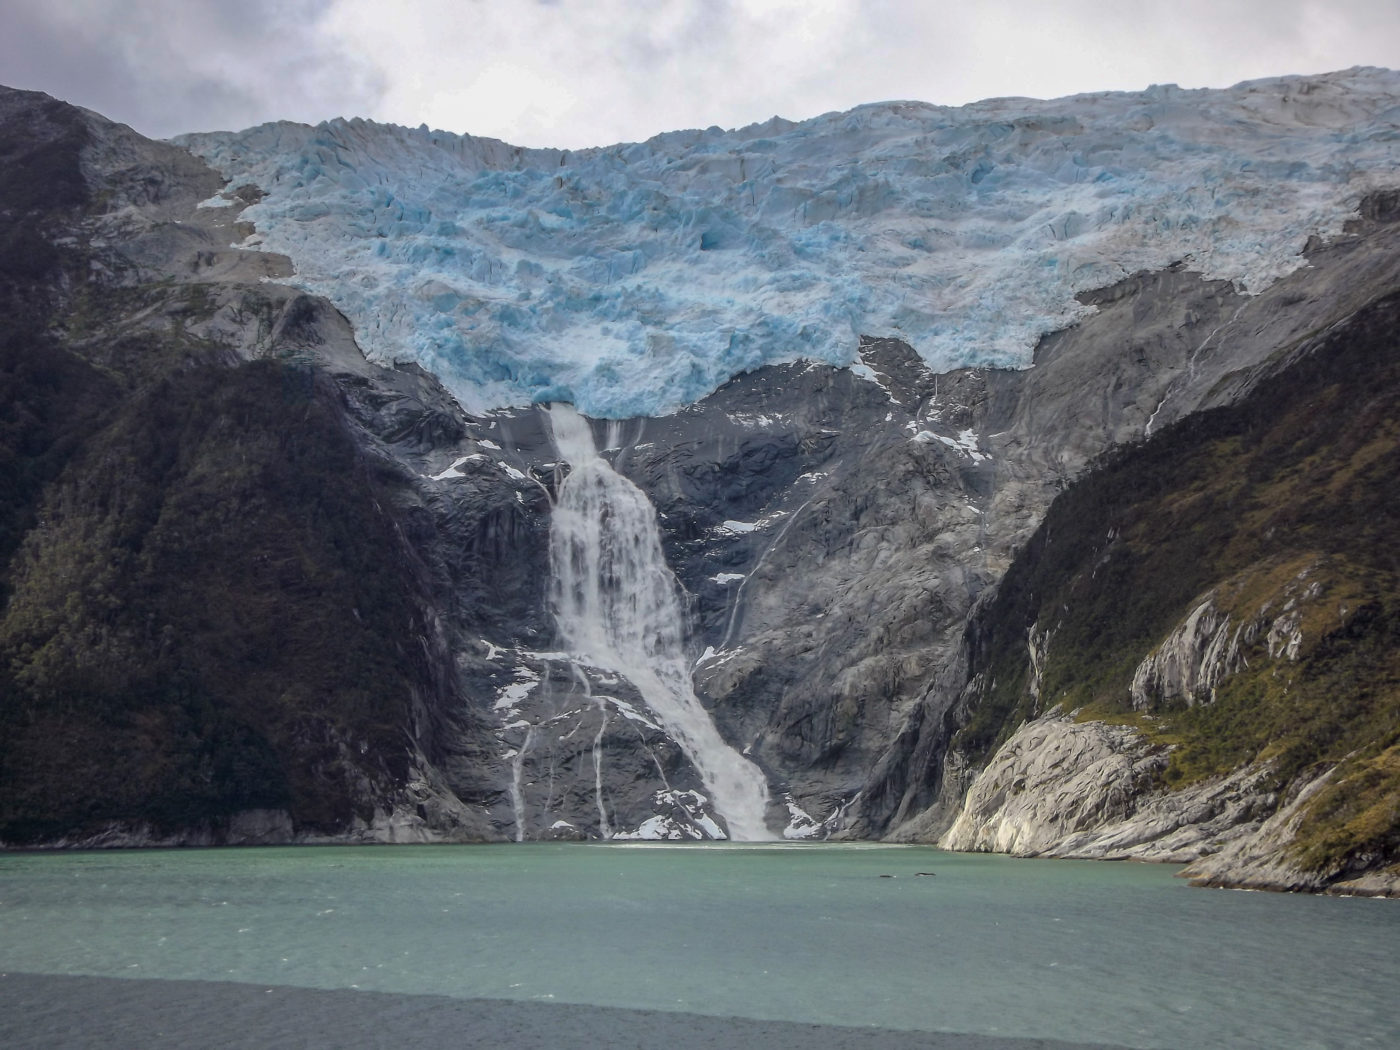 The Epic Beagle Channel’s Glacier Alley of the Chilean Fjords